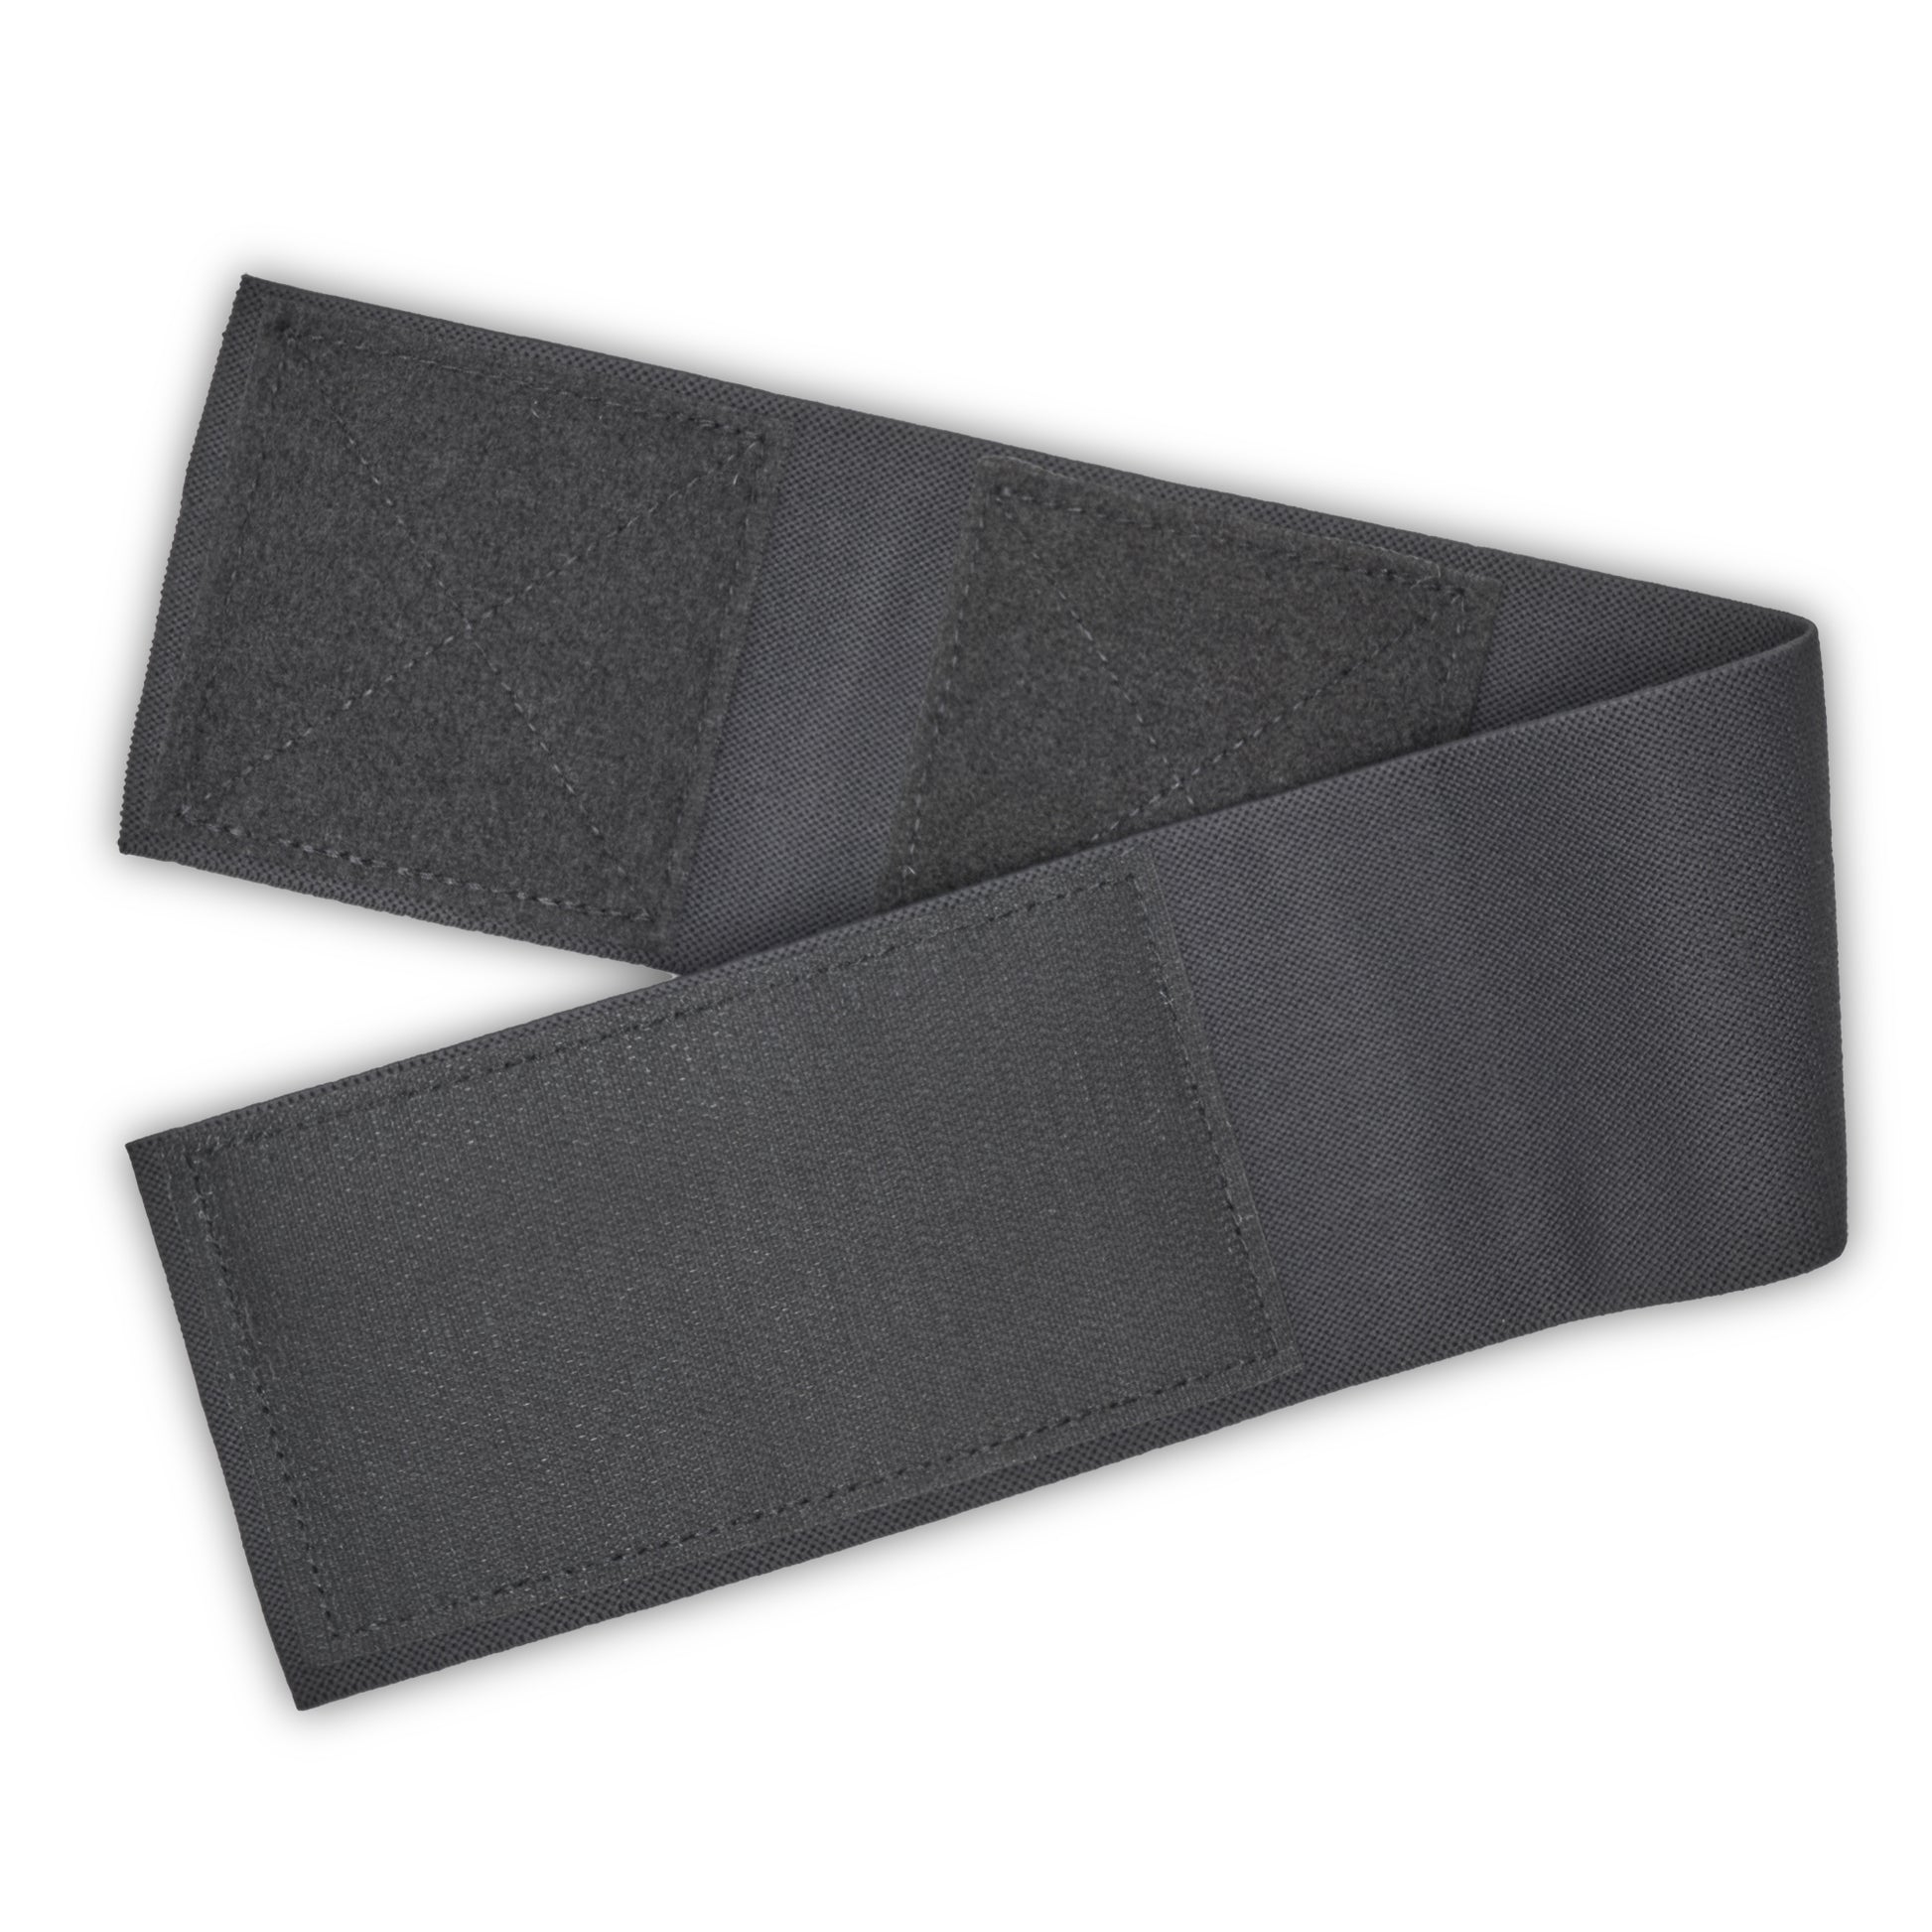 The VNSH grey waist belt extender 20 inches folded in half showing both sides with the Velcro tapes 